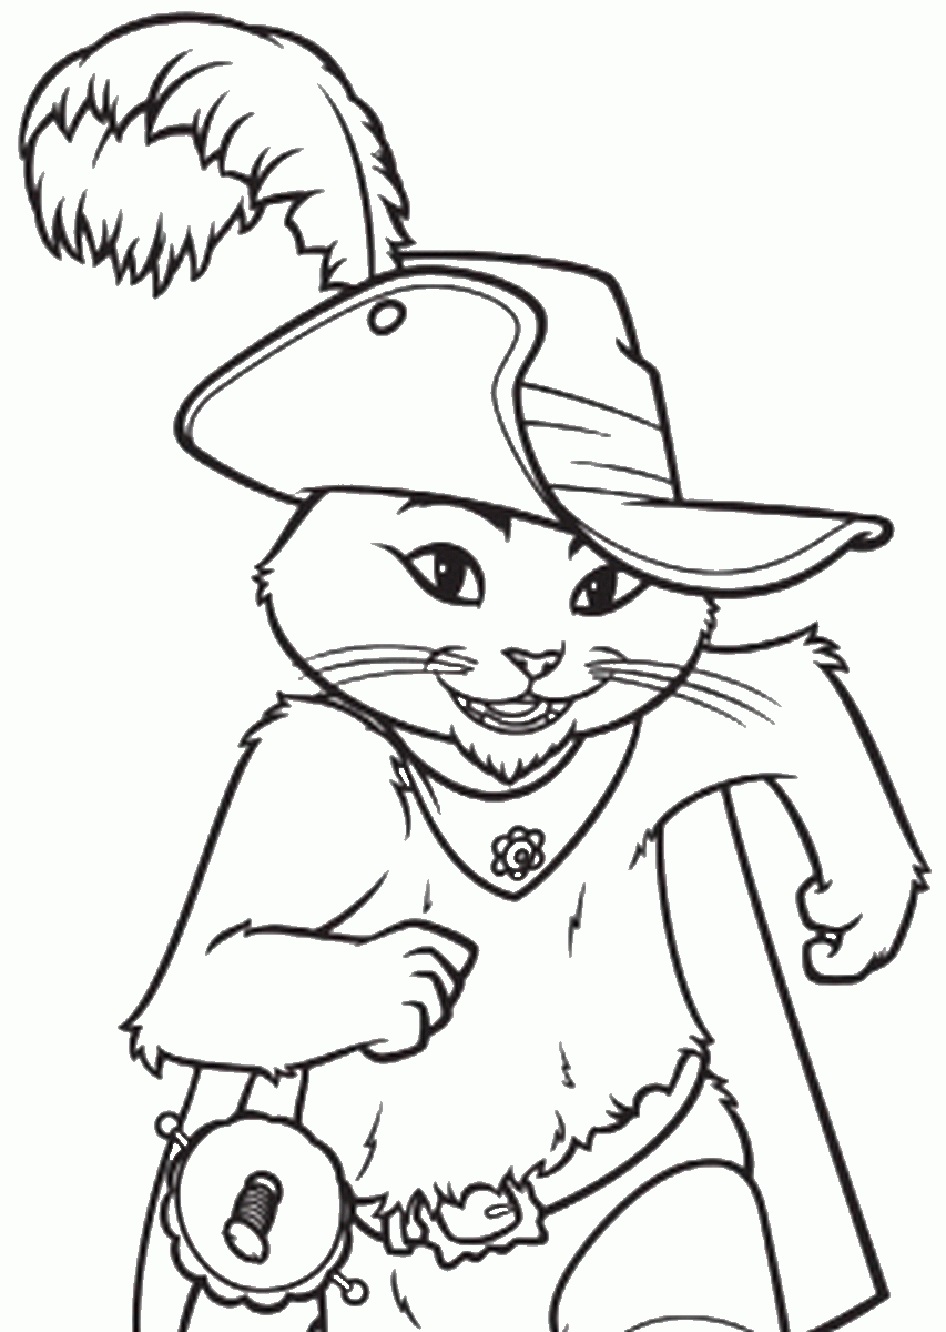 Puss in Boots The Last Wish Coloring Pages - SheetalColor.com